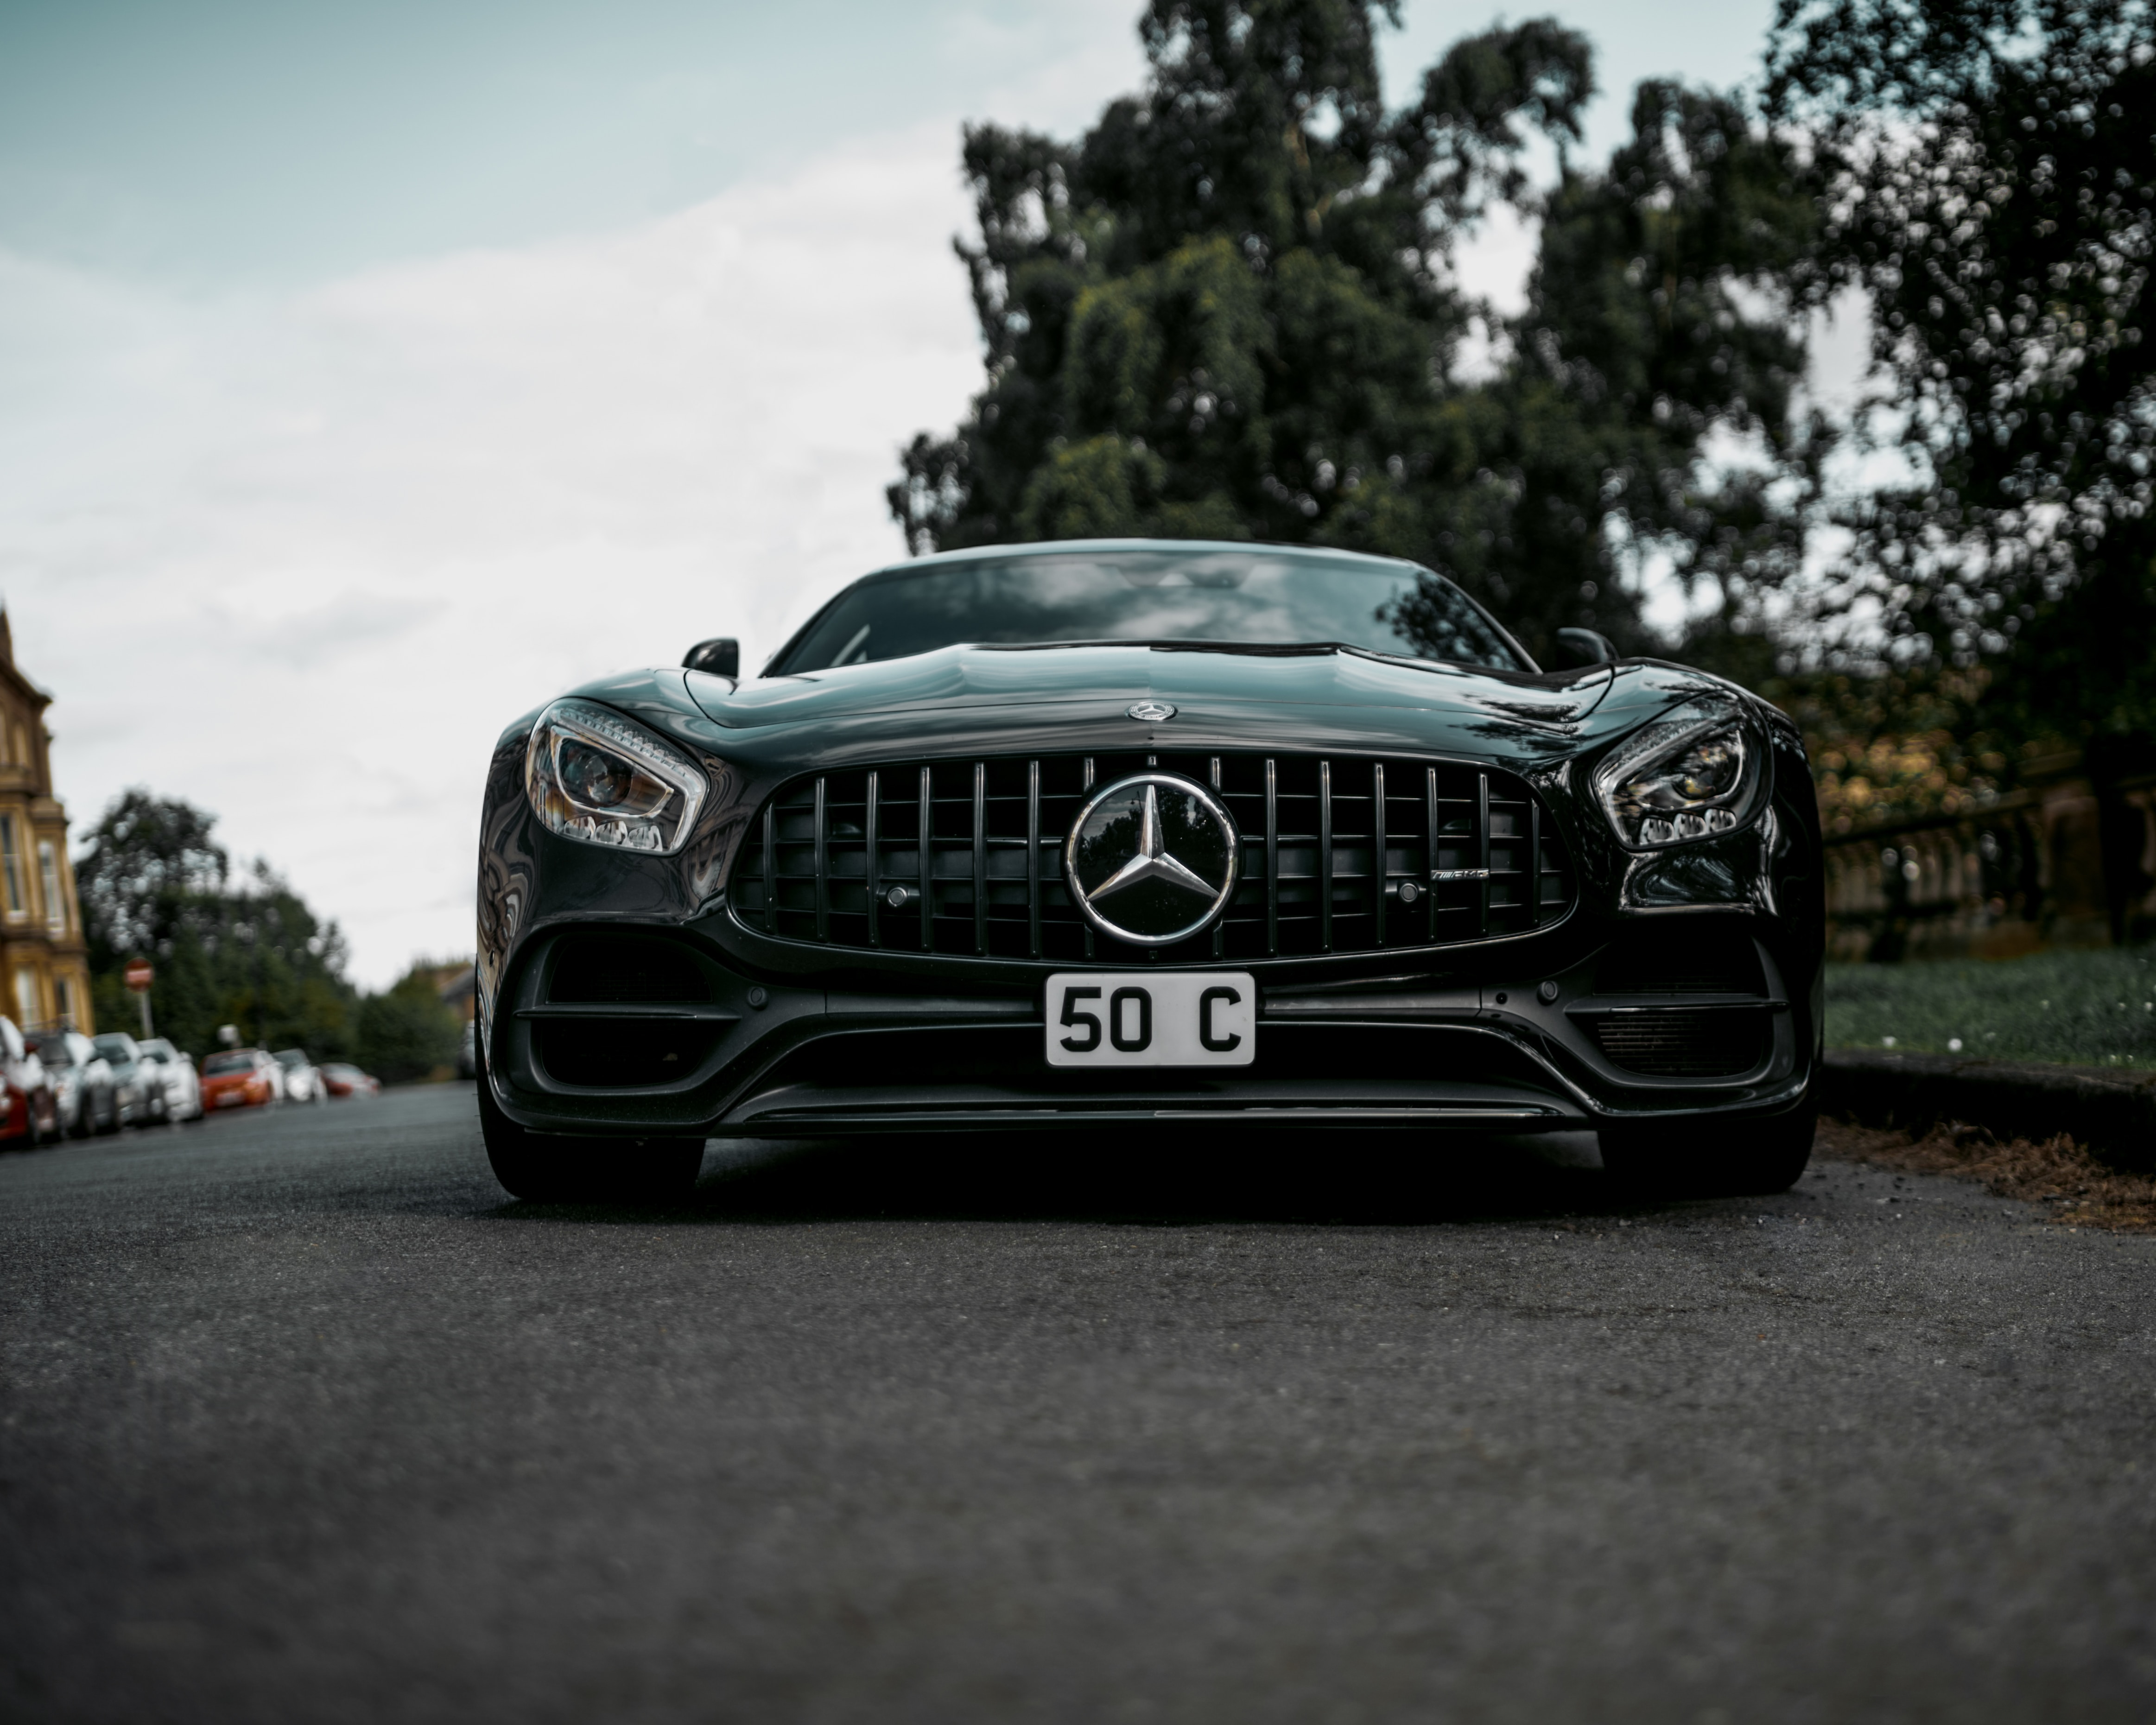 131811 download wallpaper sports, cars, black, car, front view, machine, sports car, mercedes-benz, mercedes screensavers and pictures for free